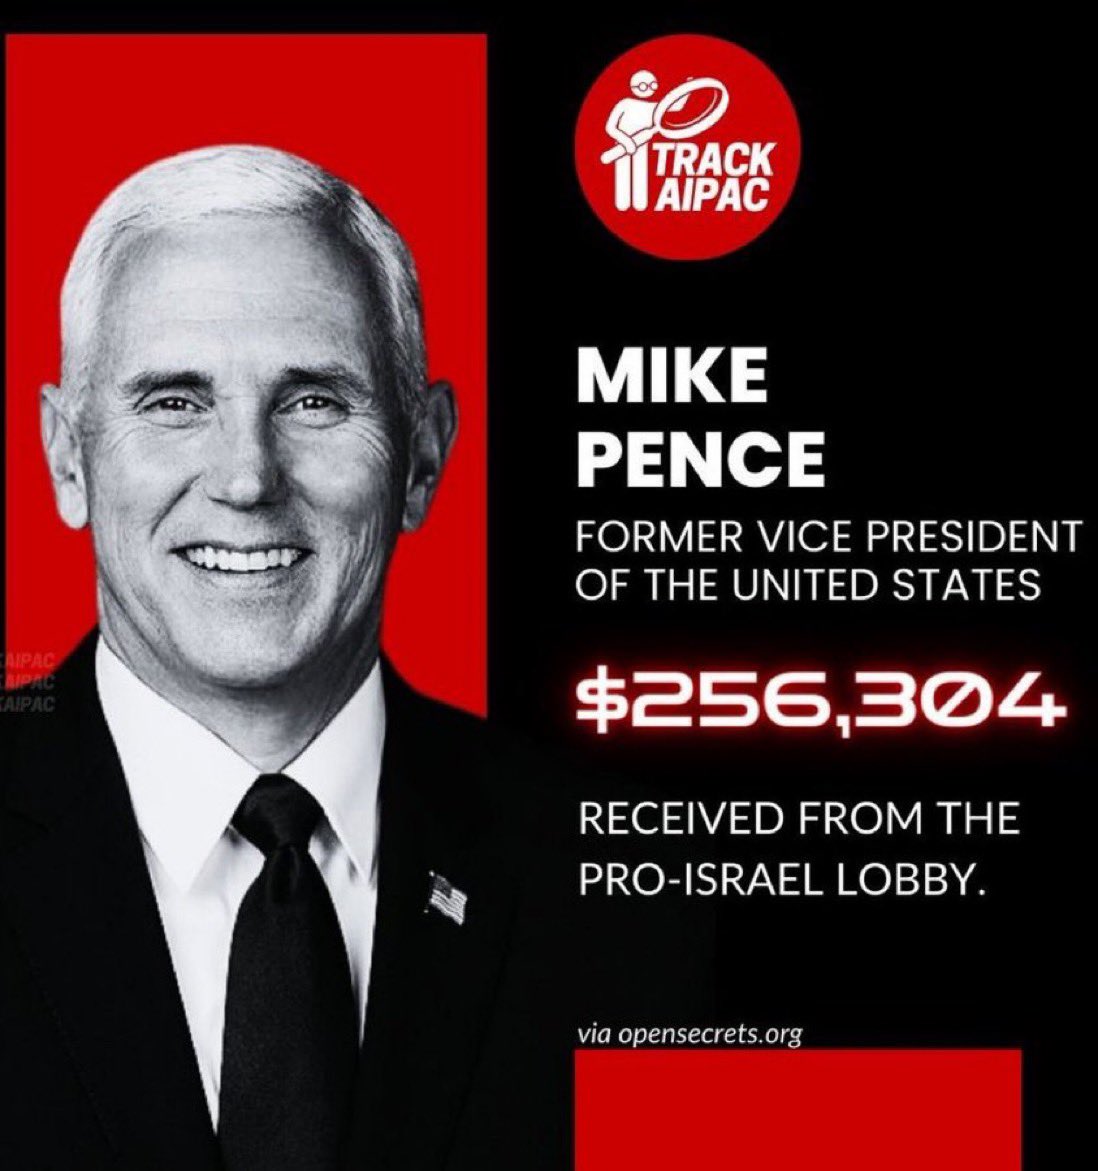 Mike Pence, you were bought, another Judas Iscariot of your own making. You are owned by the Zionists.